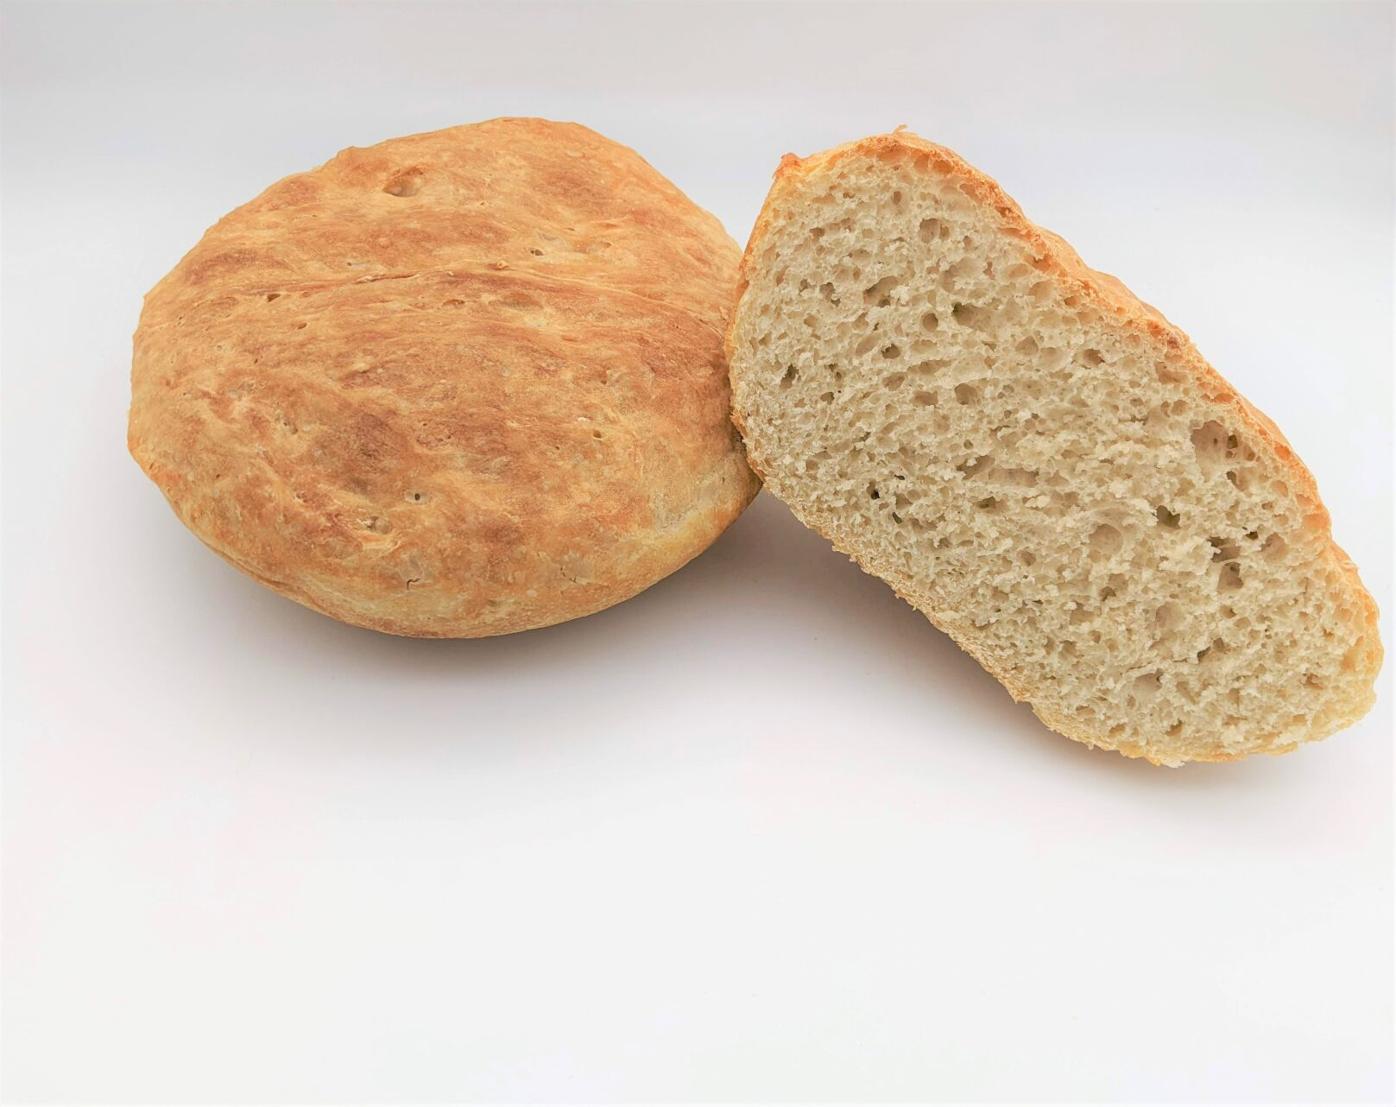 My Mother's Best, No-Knead Peasant Bread Recipe